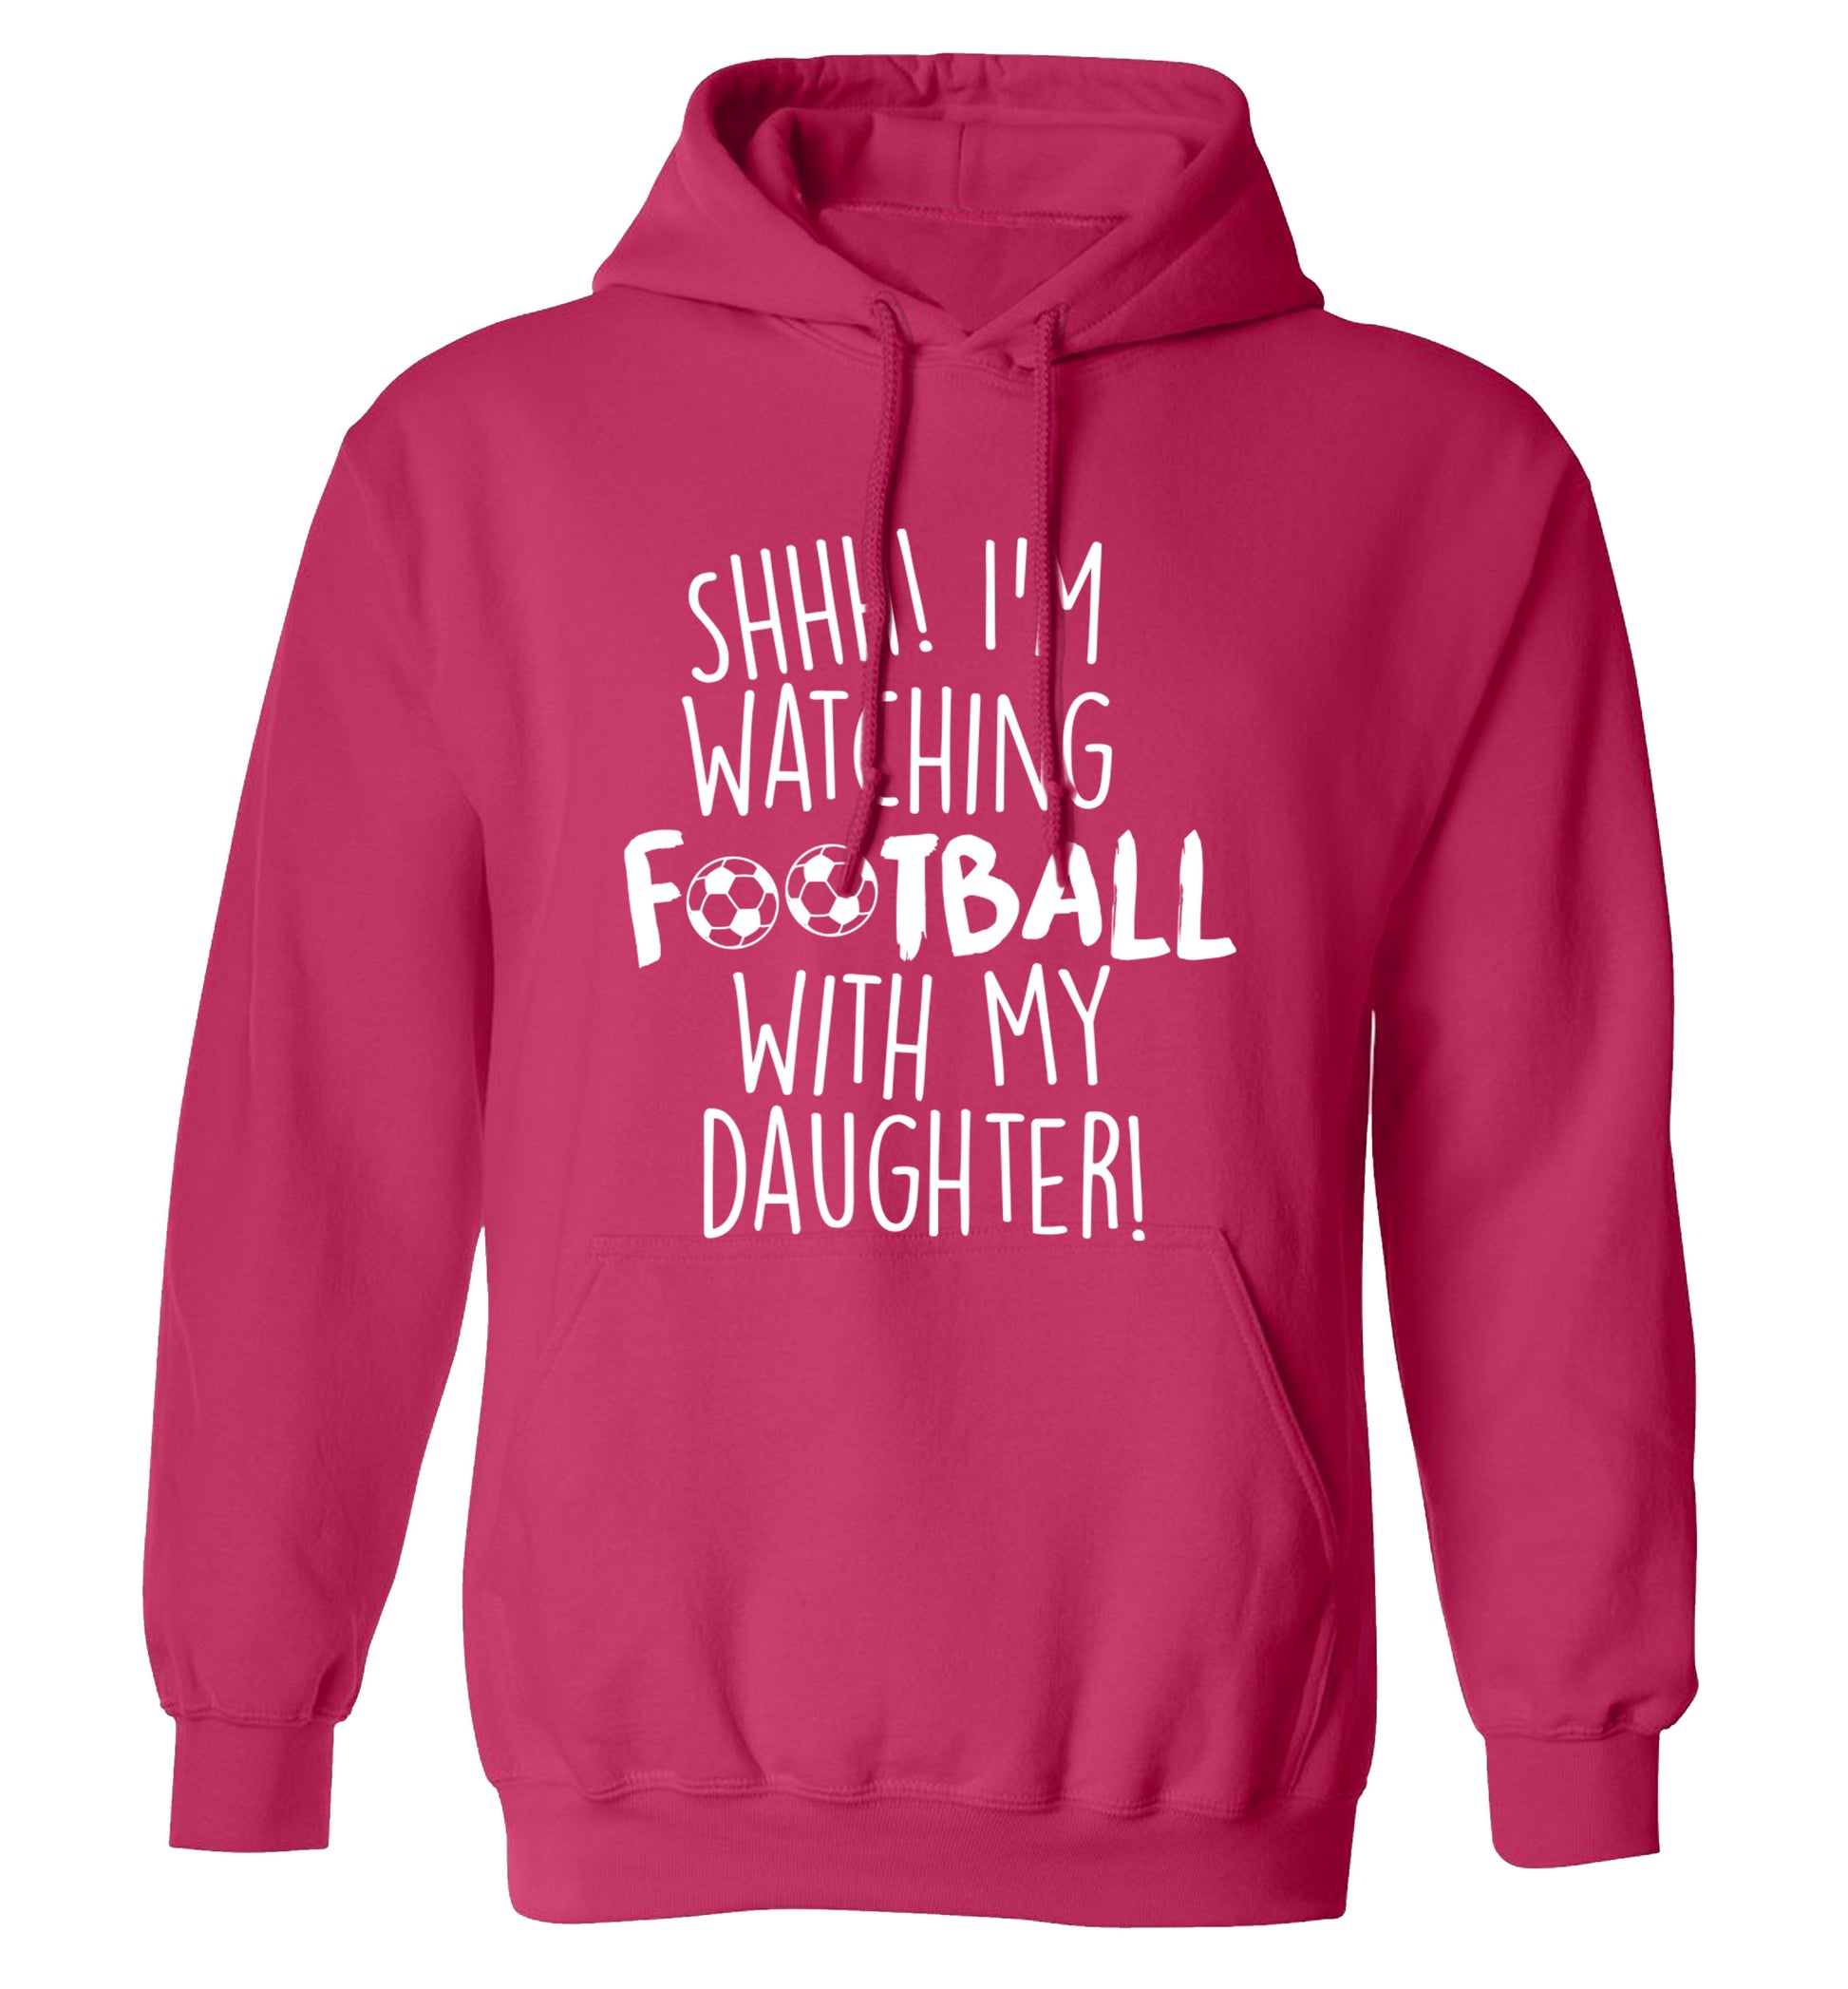 Shhh I'm watching football with my daughter adults unisexpink hoodie 2XL